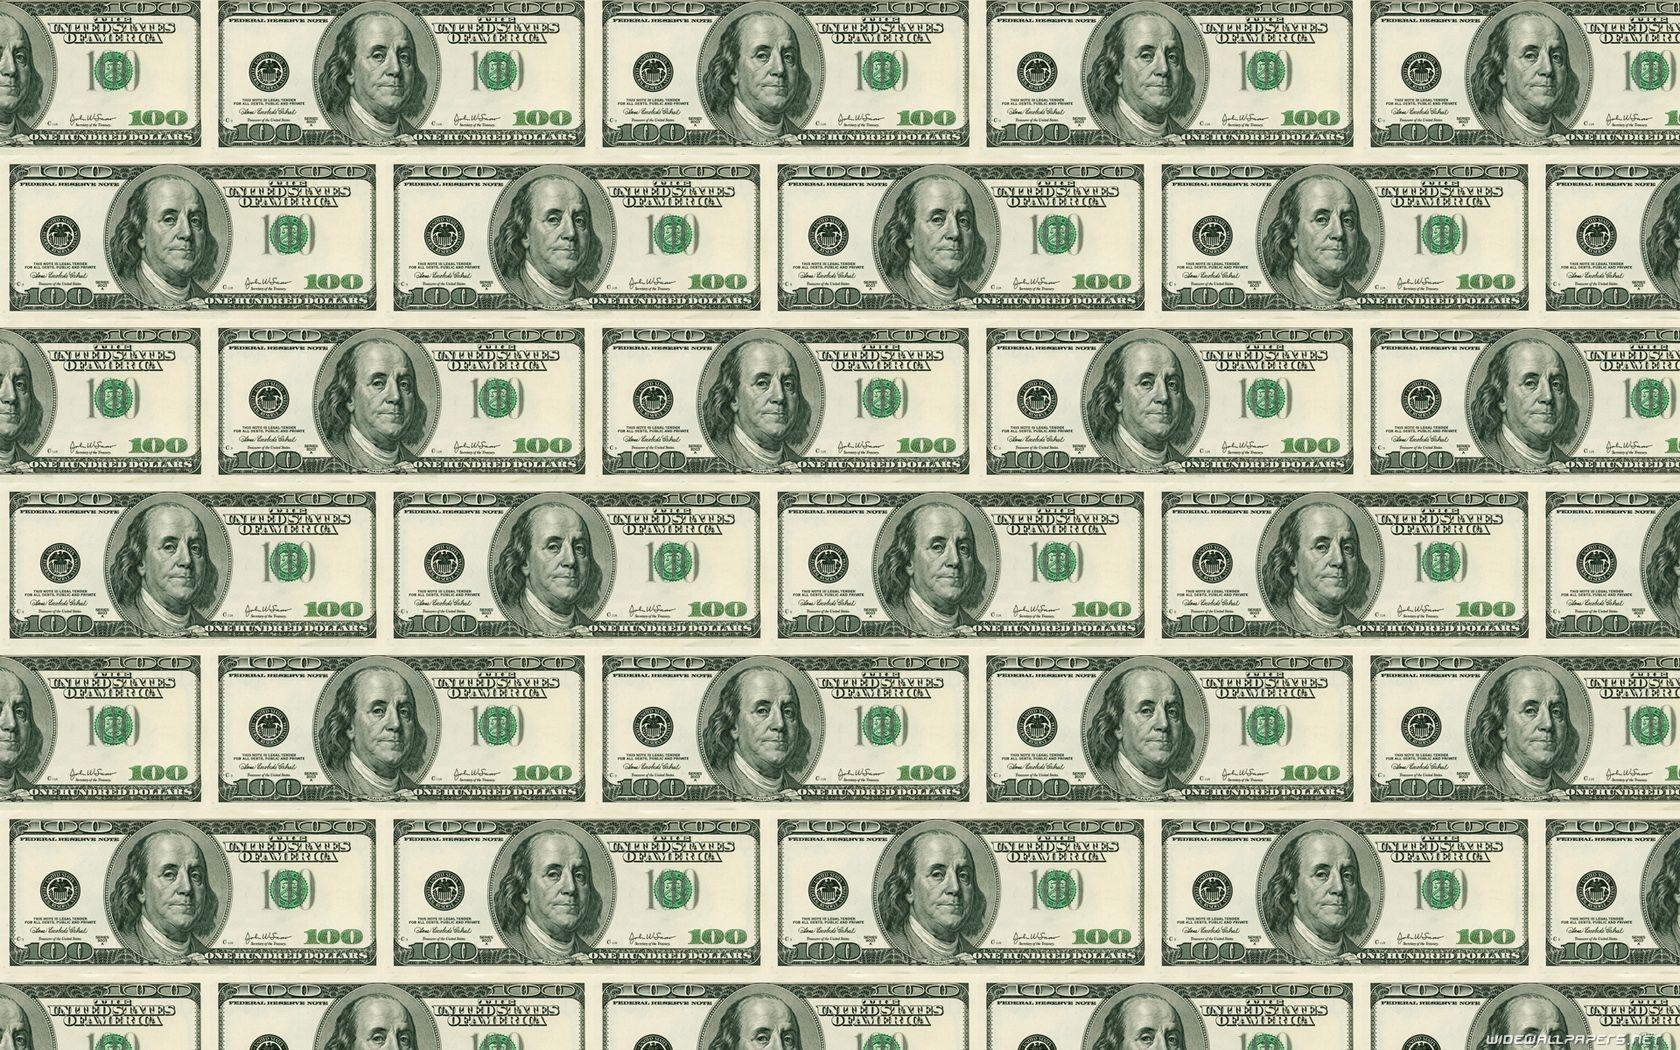 Dollar HD Wallpaper Background For Free Download, BsnSCB Graphics